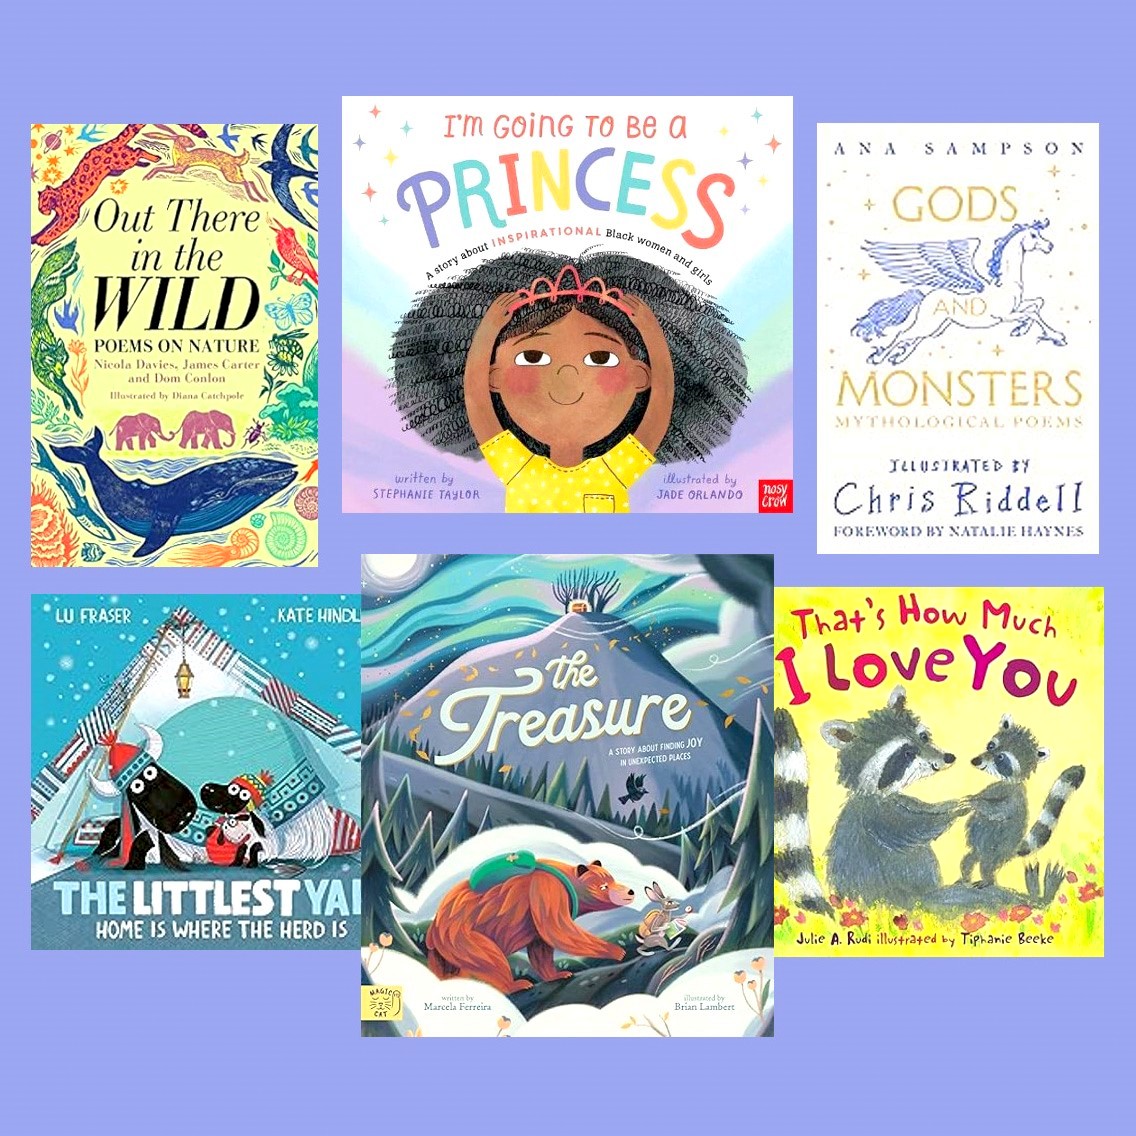 So many beautiful books are being published today – here are just a few of them. Huge congratulations and happy book birthday everyone! #PublicationDay #BookBirthday #newbooks #PictureBooks #PoetryBooks